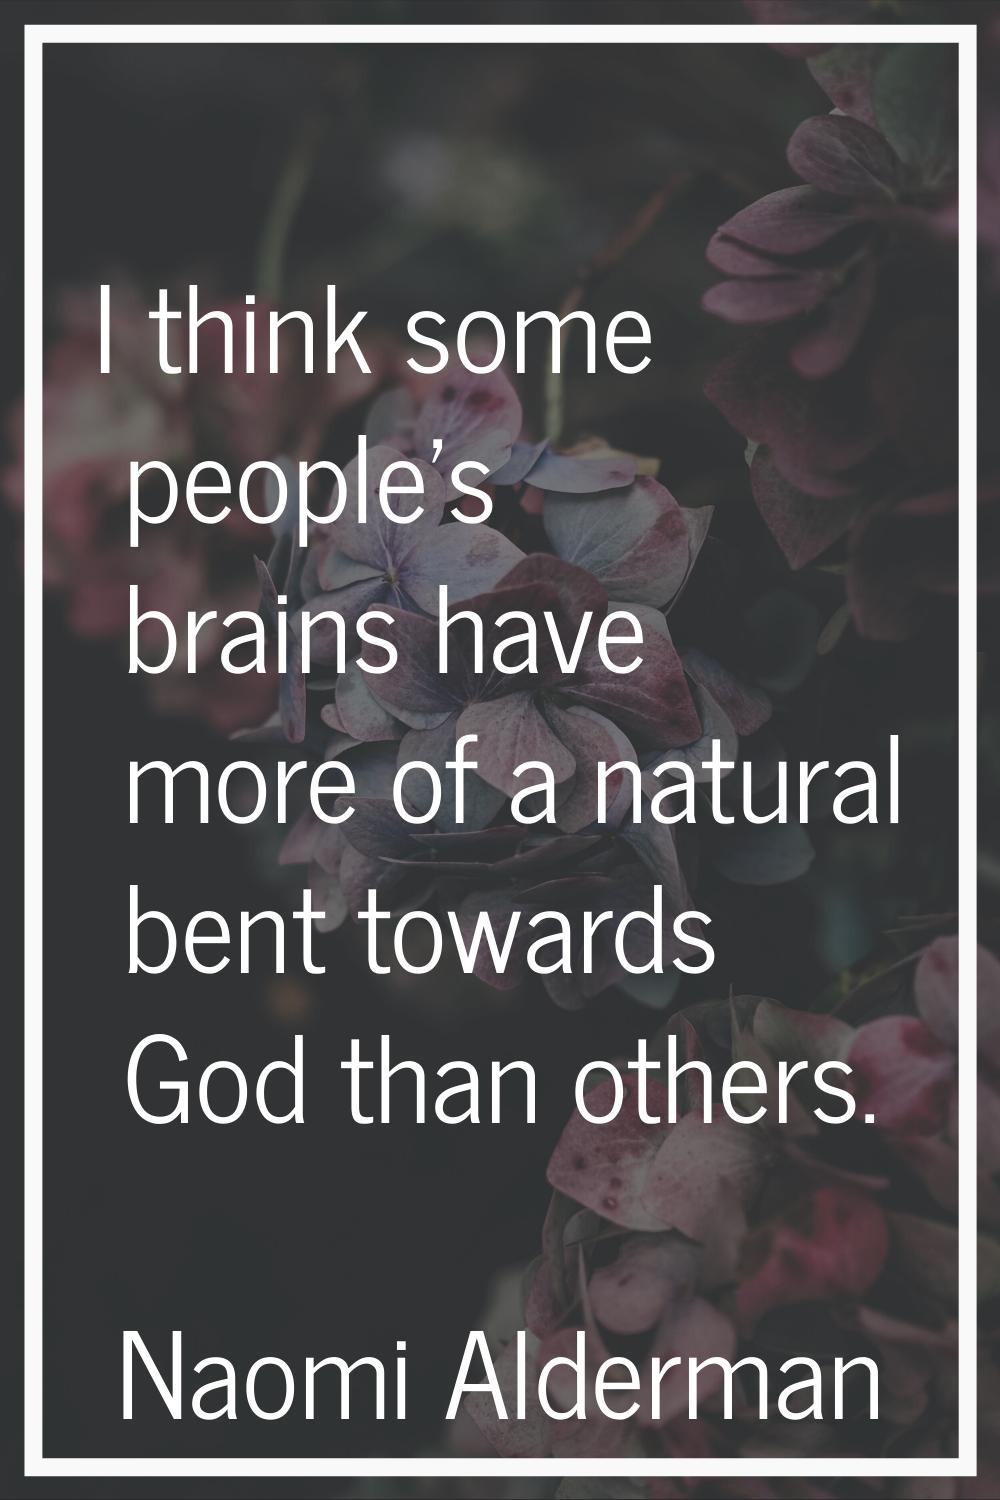 I think some people's brains have more of a natural bent towards God than others.